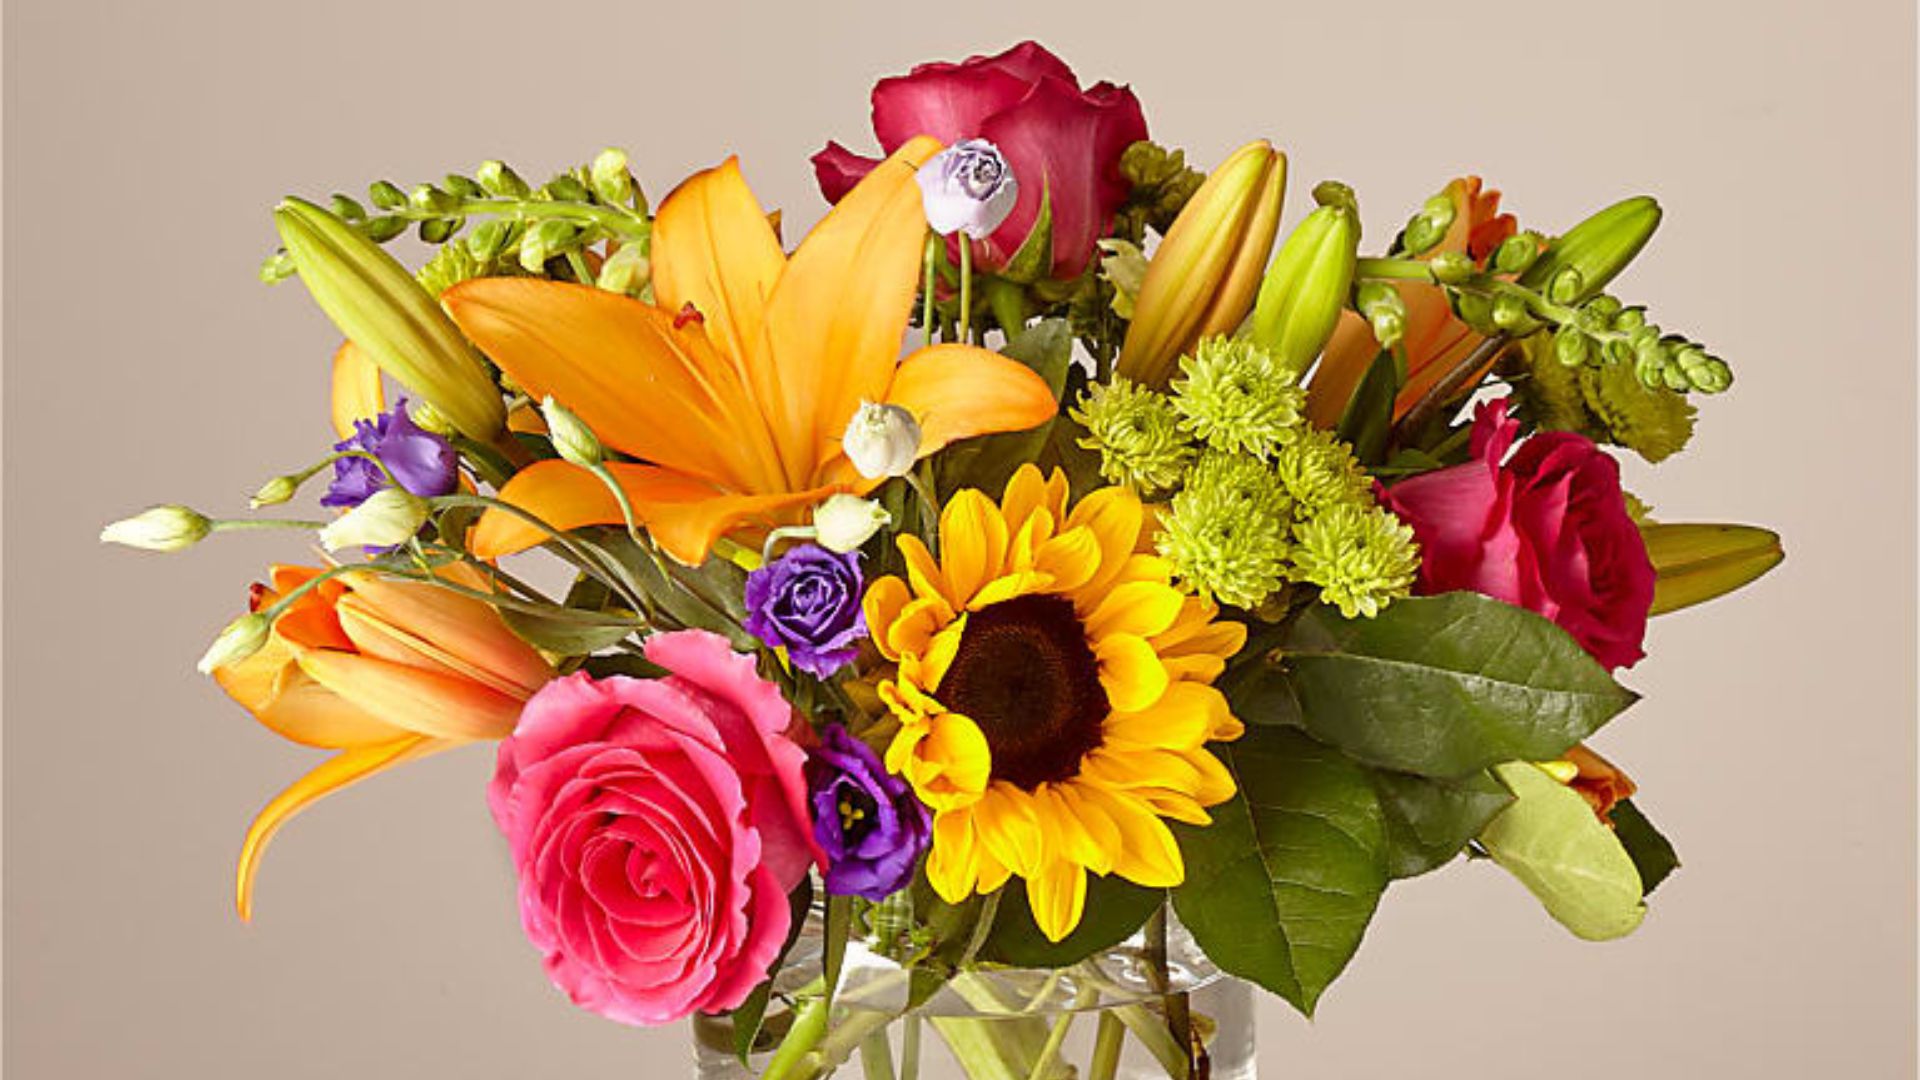 Where to Order Flowers for Mother's Day